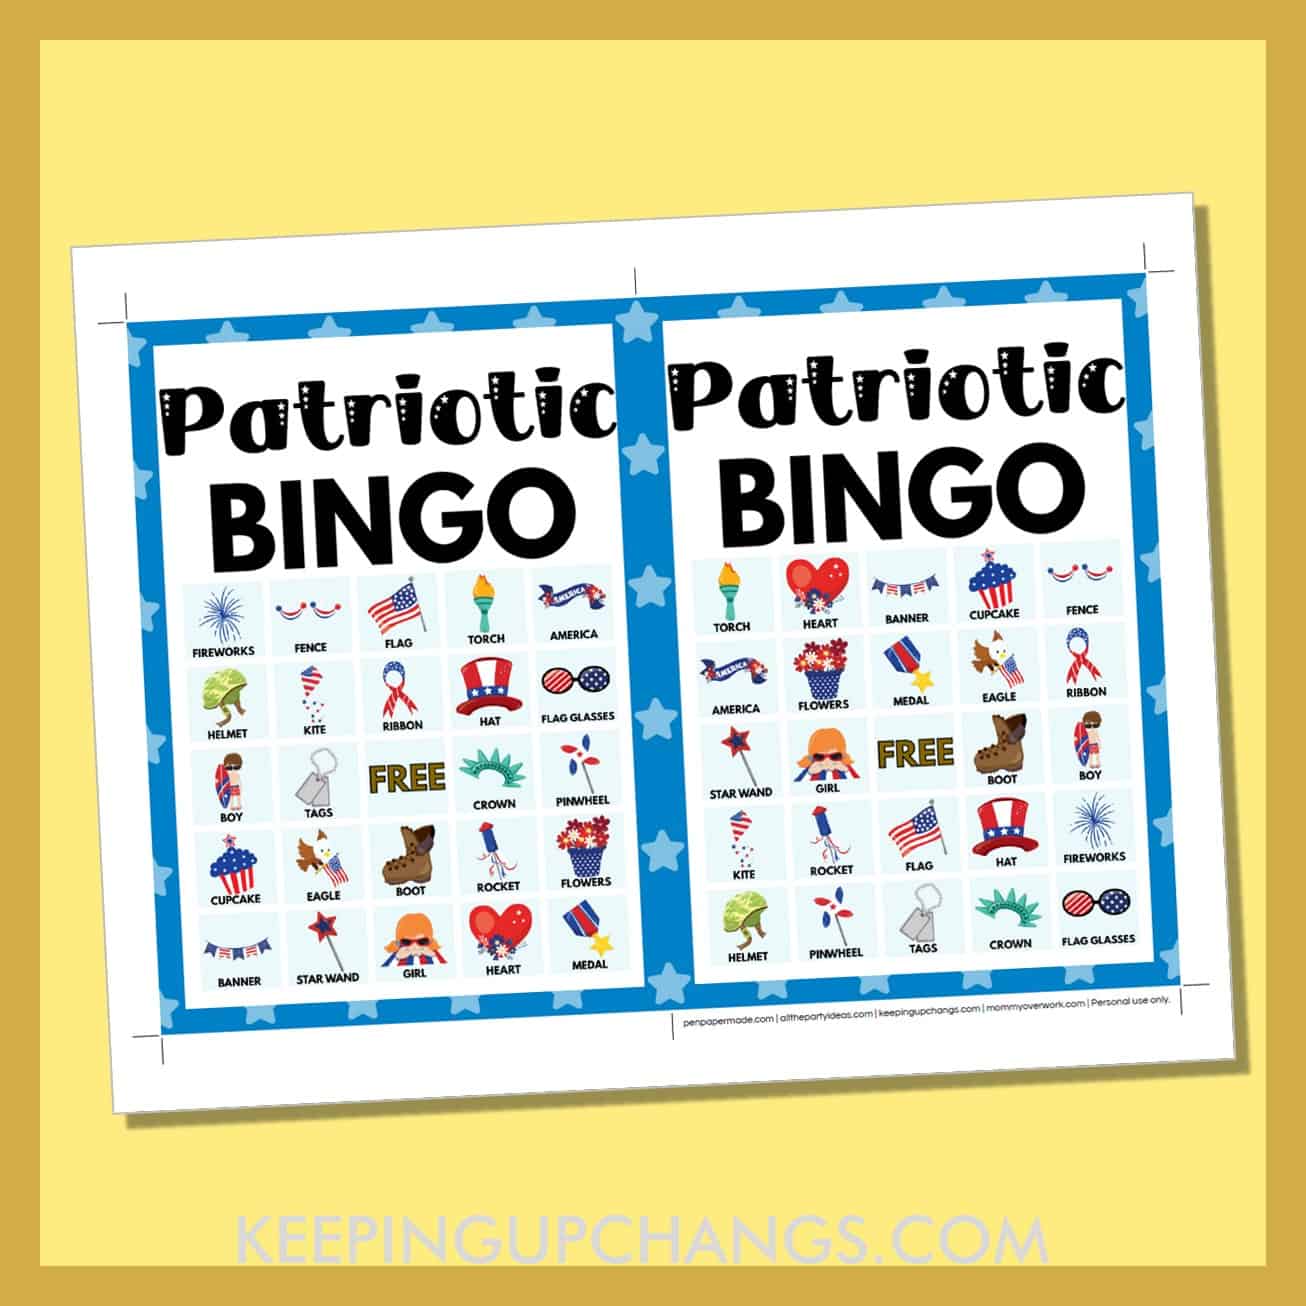 free patriotic bingo card 5x5 5x7 game boards with images and text words.